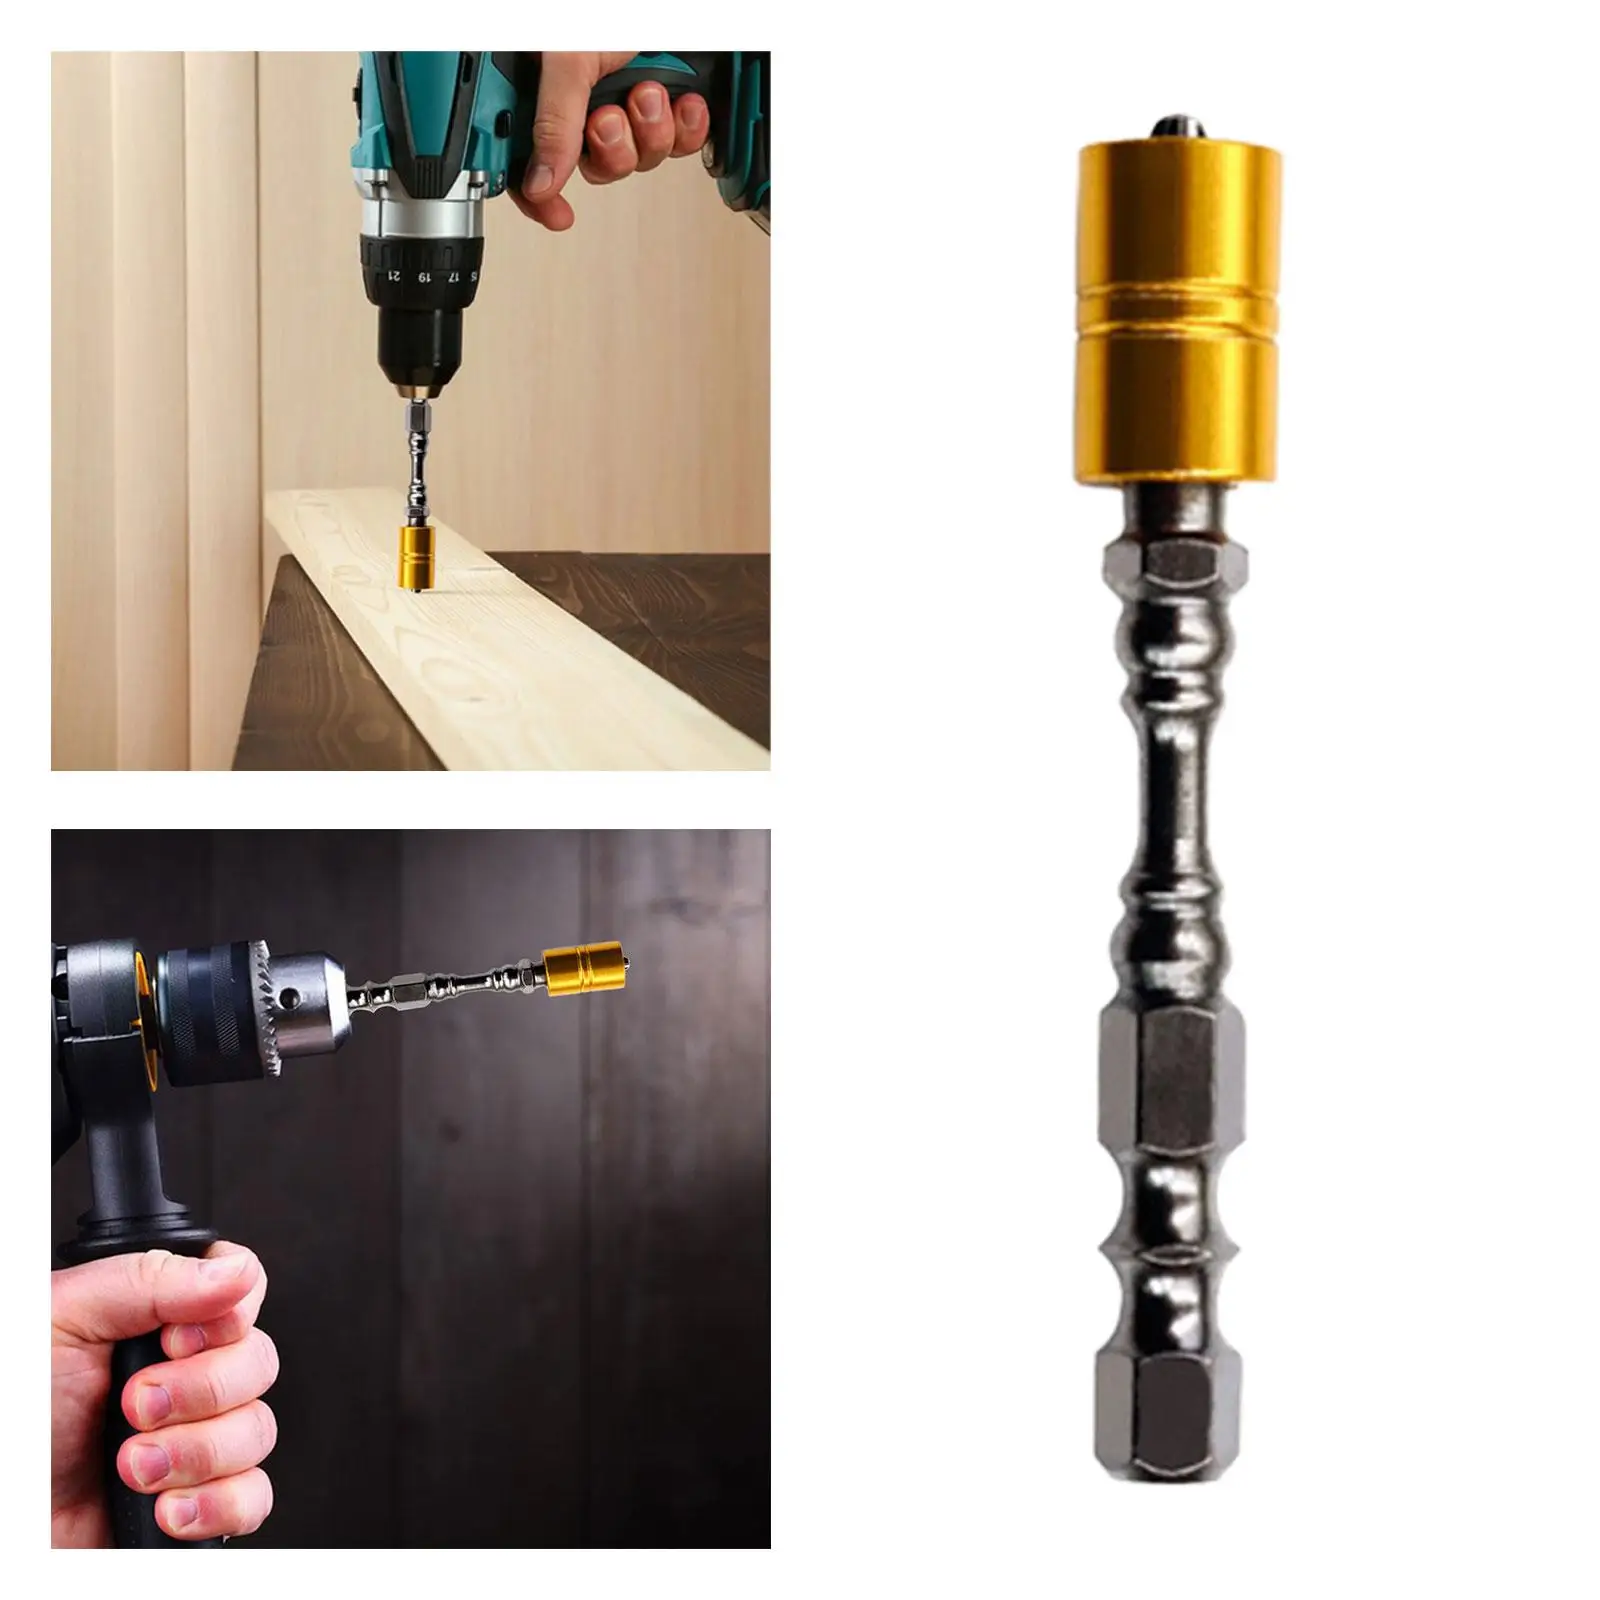 PH2 Magnetic Screwdriver Bit Quick Release Durable Professional for Electric Screwdrivers Hand Screwdrivers Pneumatic Drills